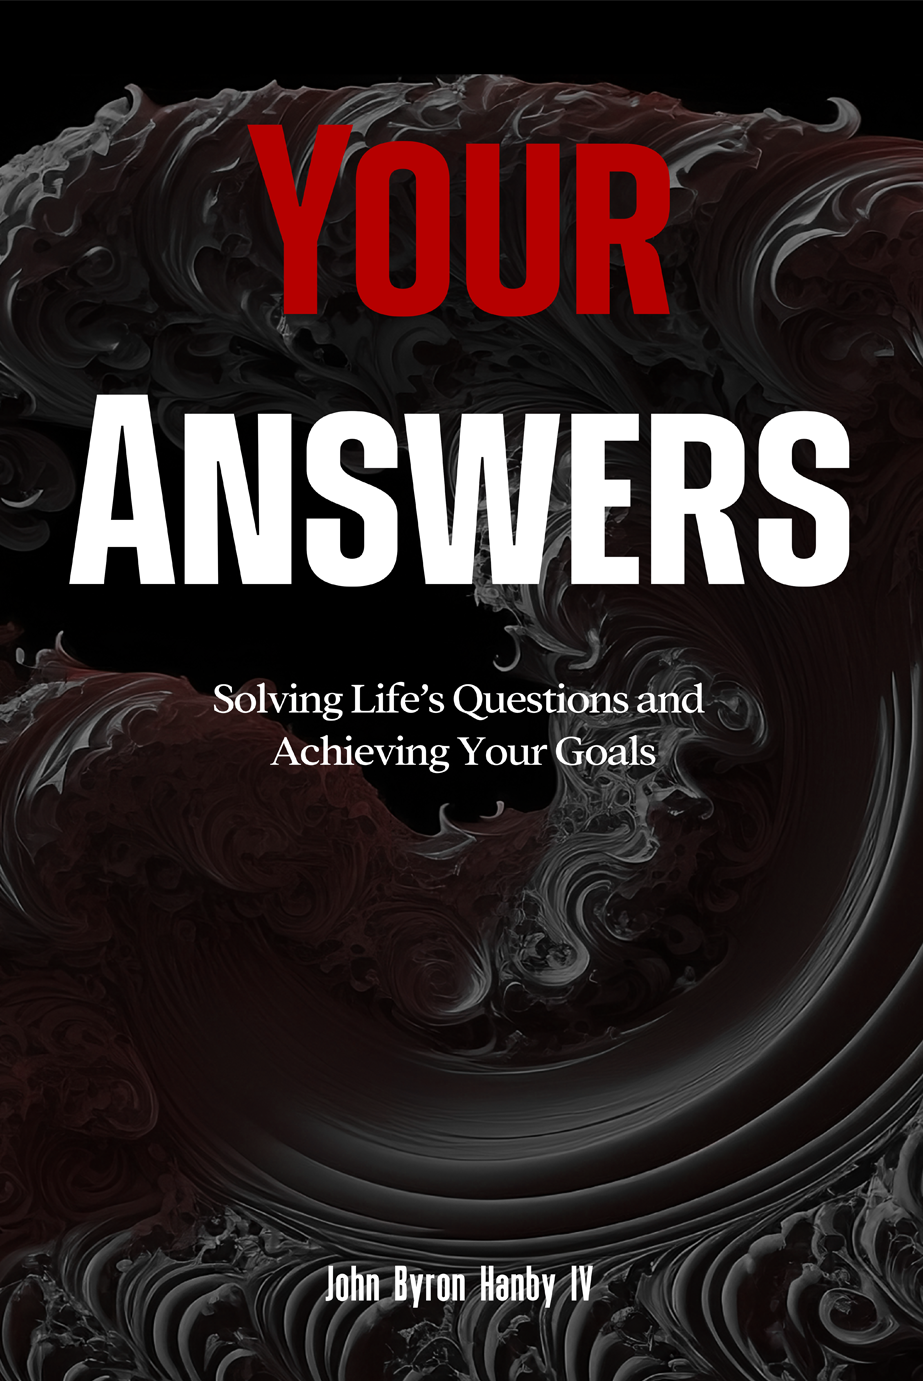 //youranswersbook.com/wp-content/uploads/2023/01/book-cover.png